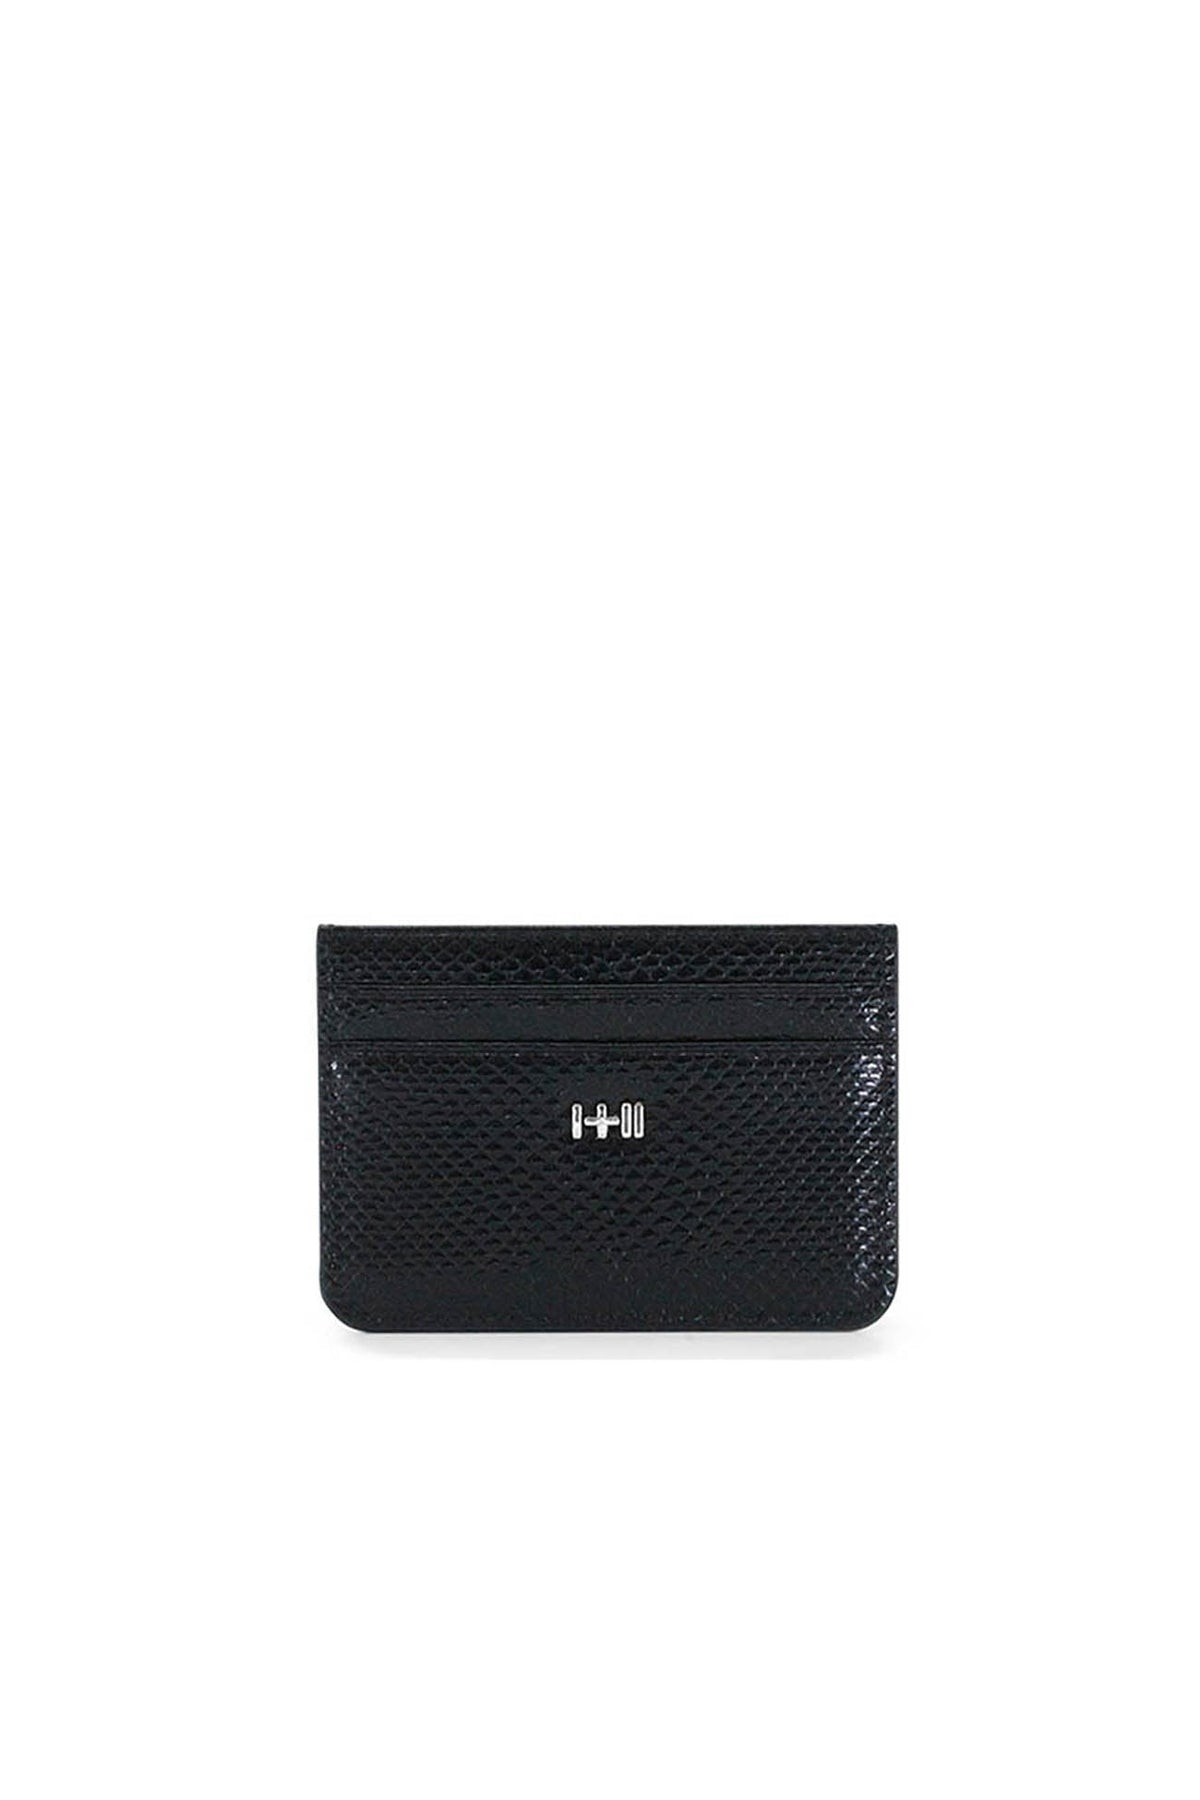 THE OPIUM CARD HOLDER BLACK SILVER